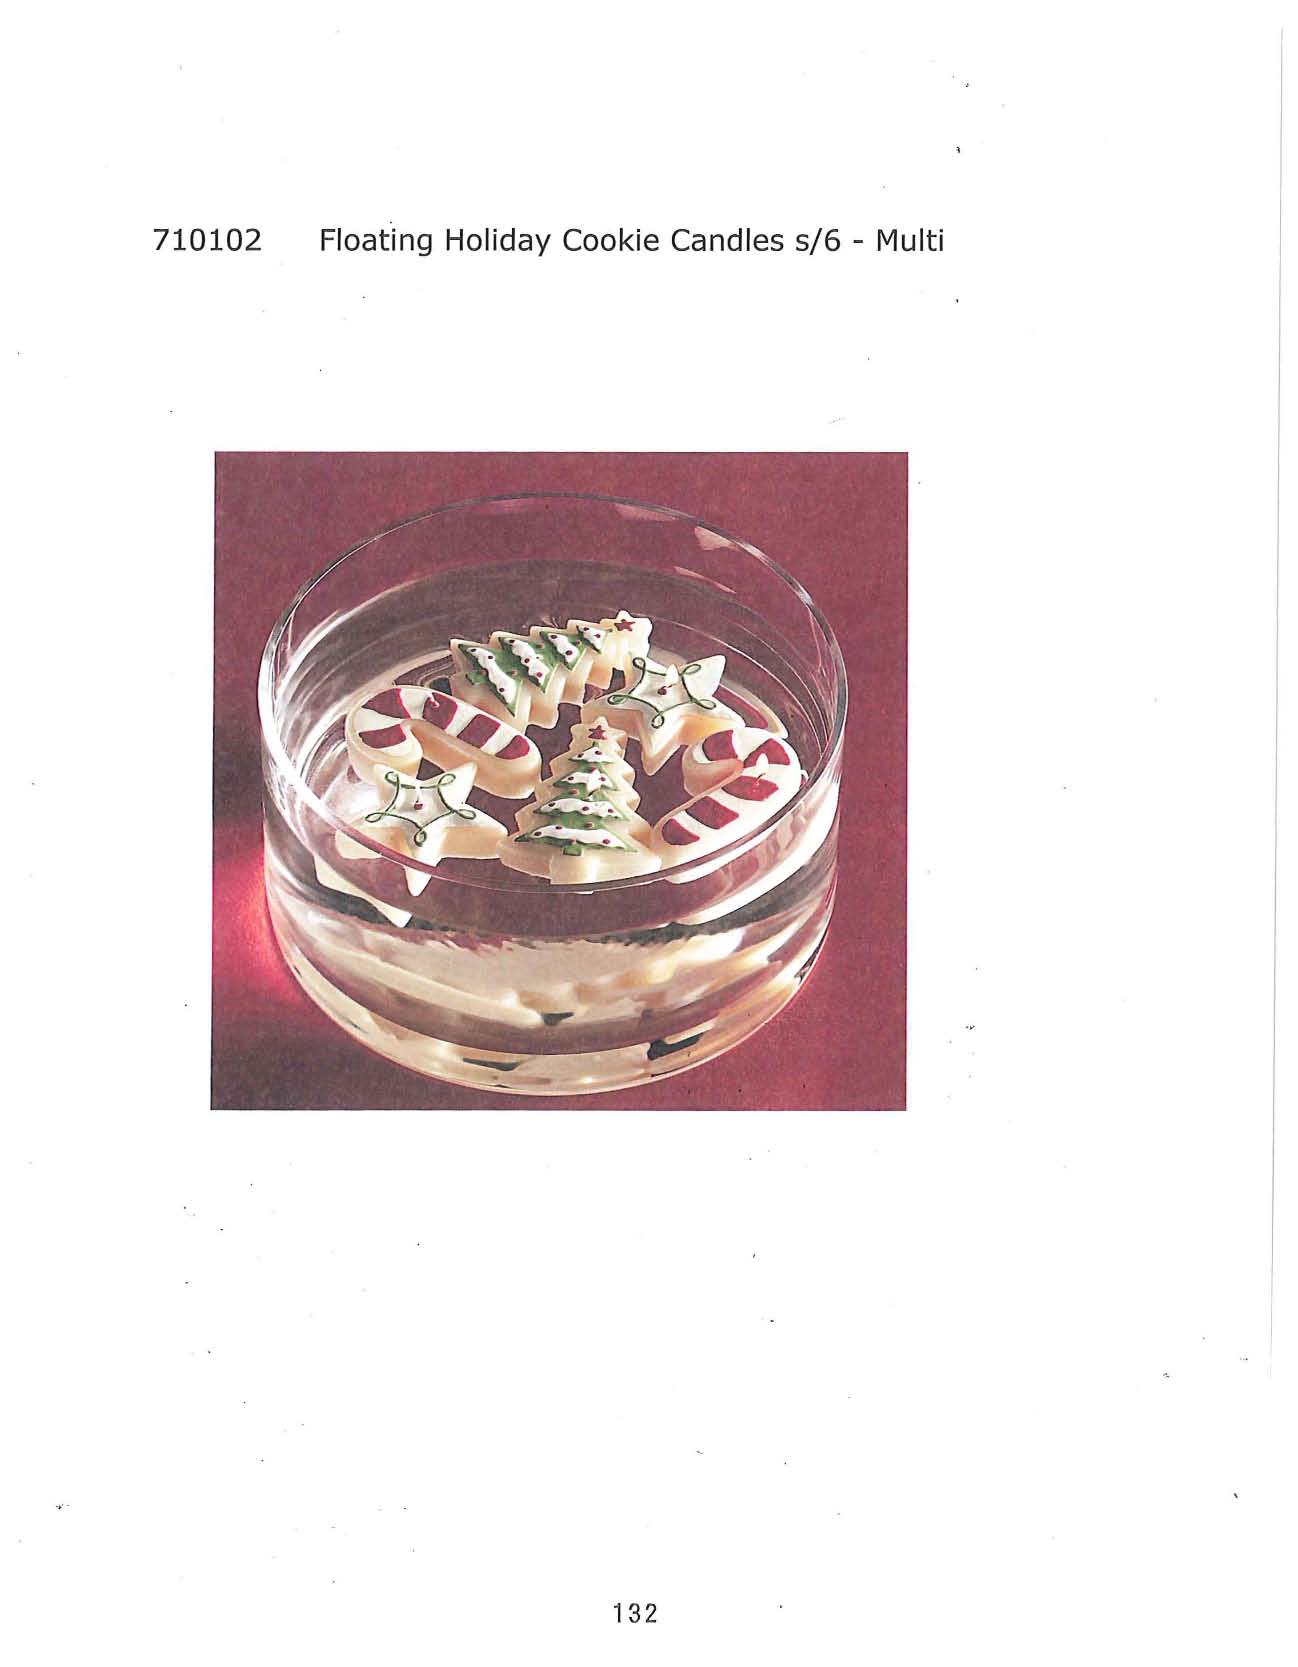 Floating Holiday Cookie Candle s/6 - Multi